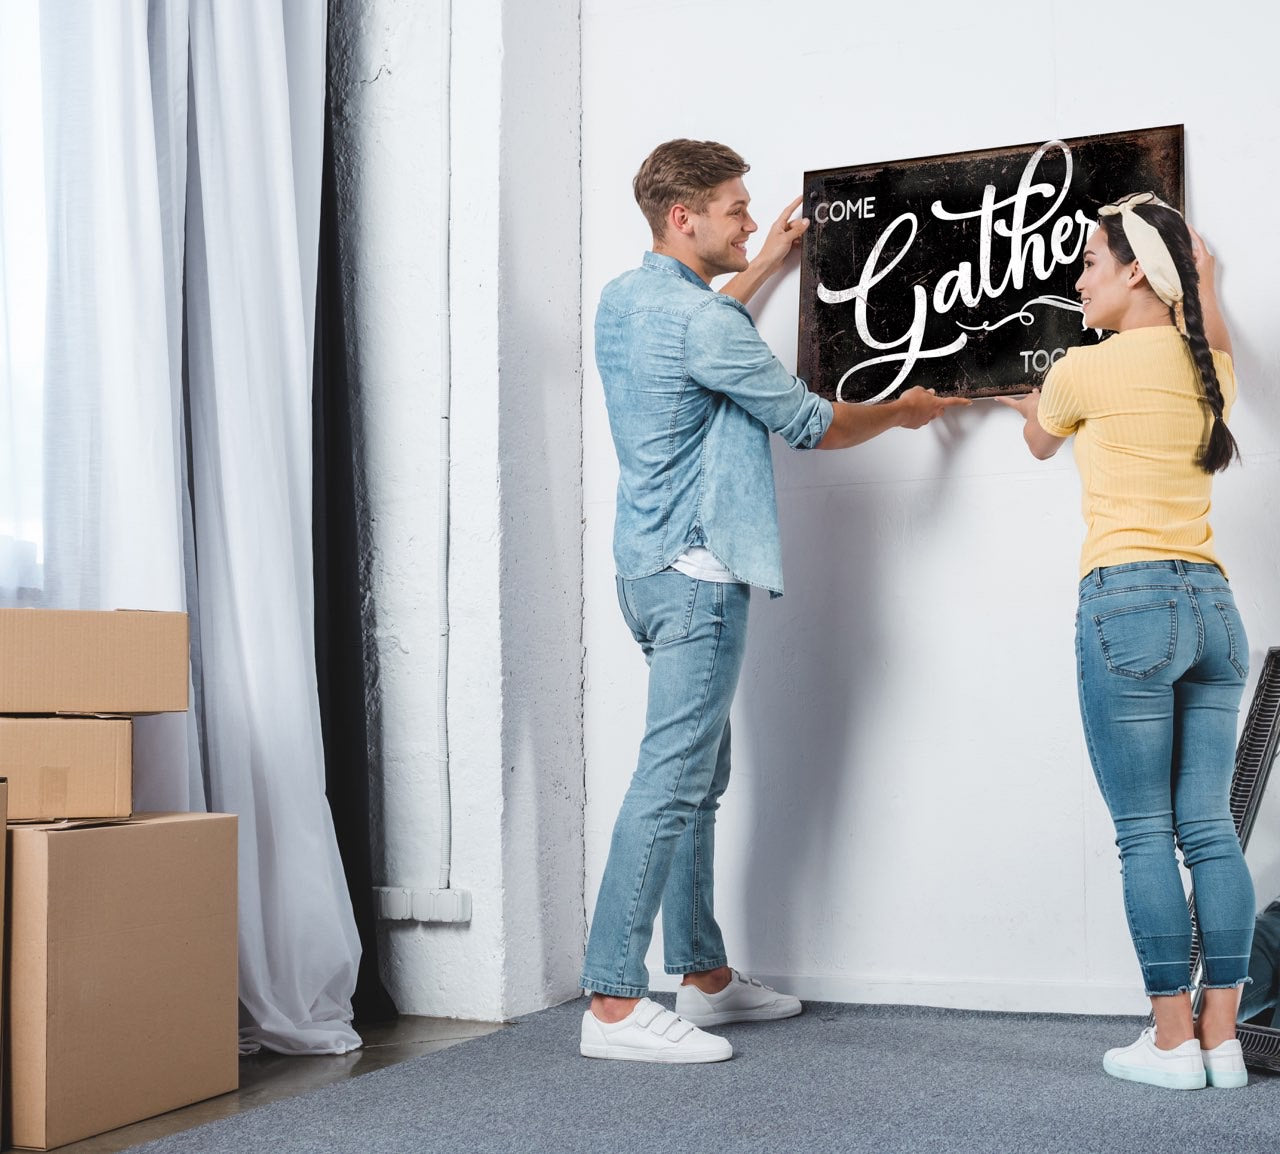 Modern Farmhouse Decor That newlyweds hanging up custom wall art in their new home. Moving boxes are in the background and couple is hanging a black sign with white lettering that says "gather". 